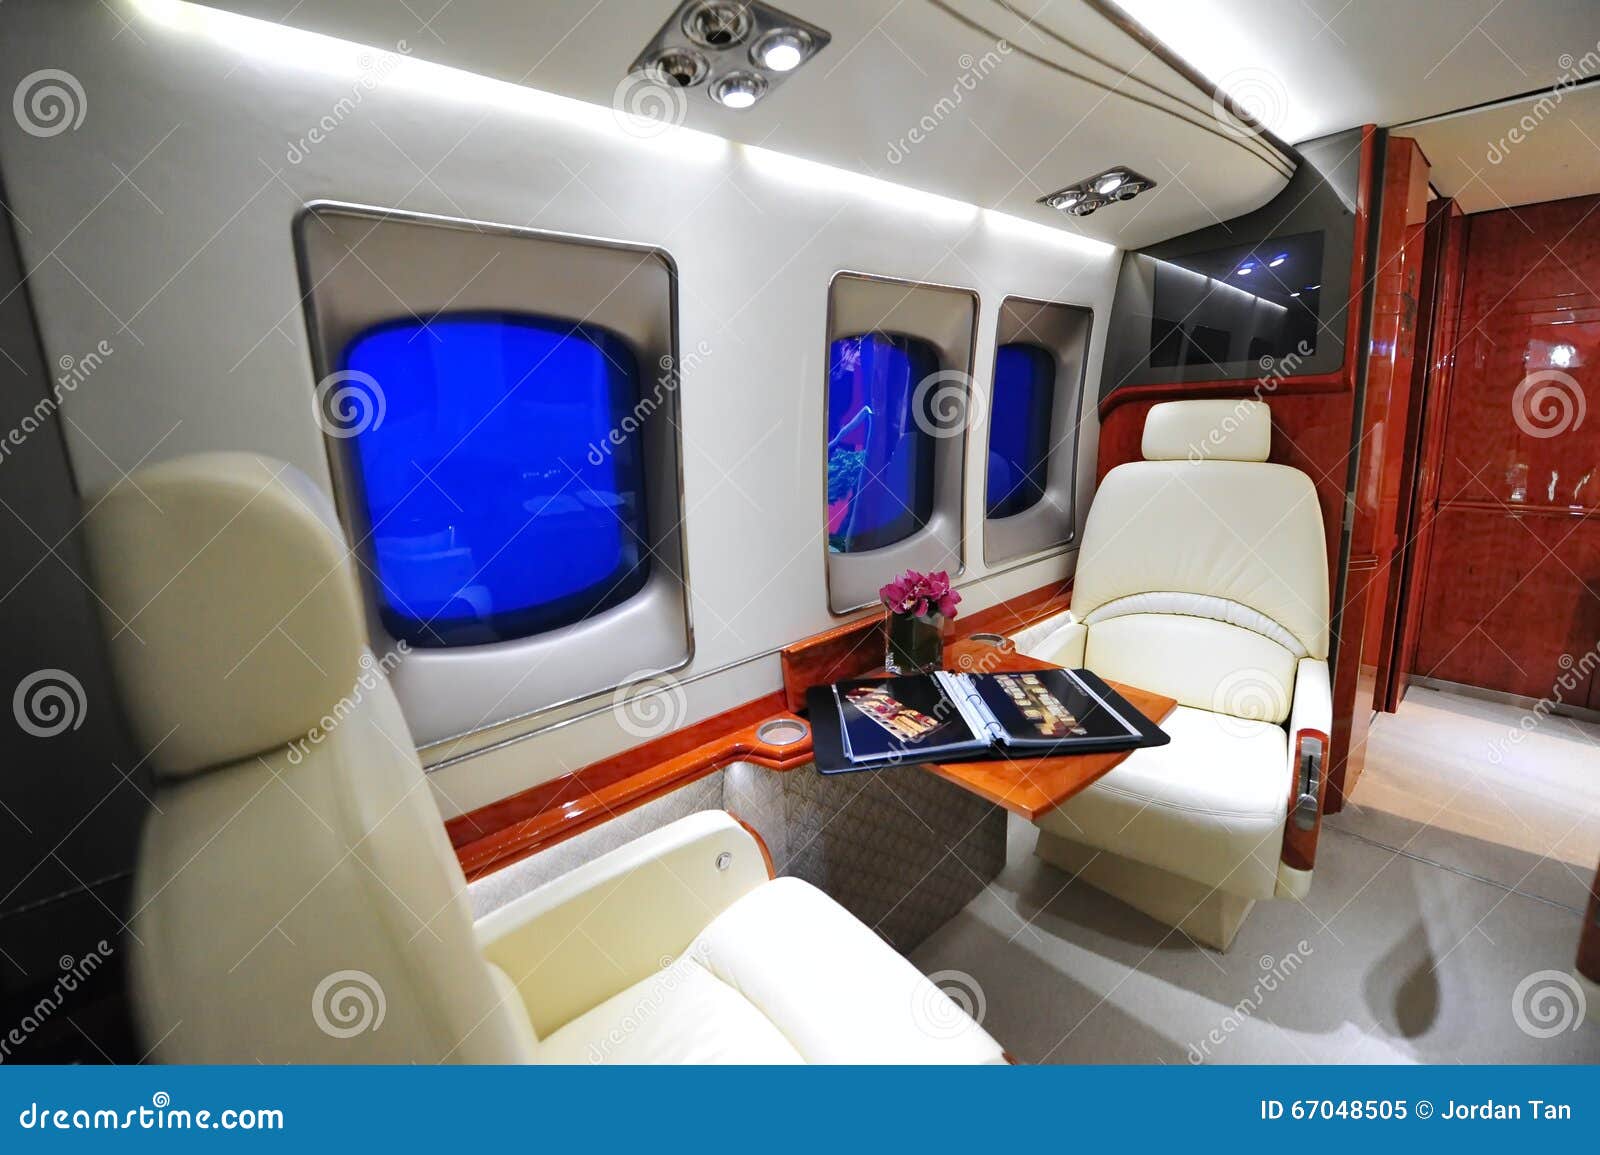 Spacious And Luxurious Interior Of Sikorsky H 92 Helicopter